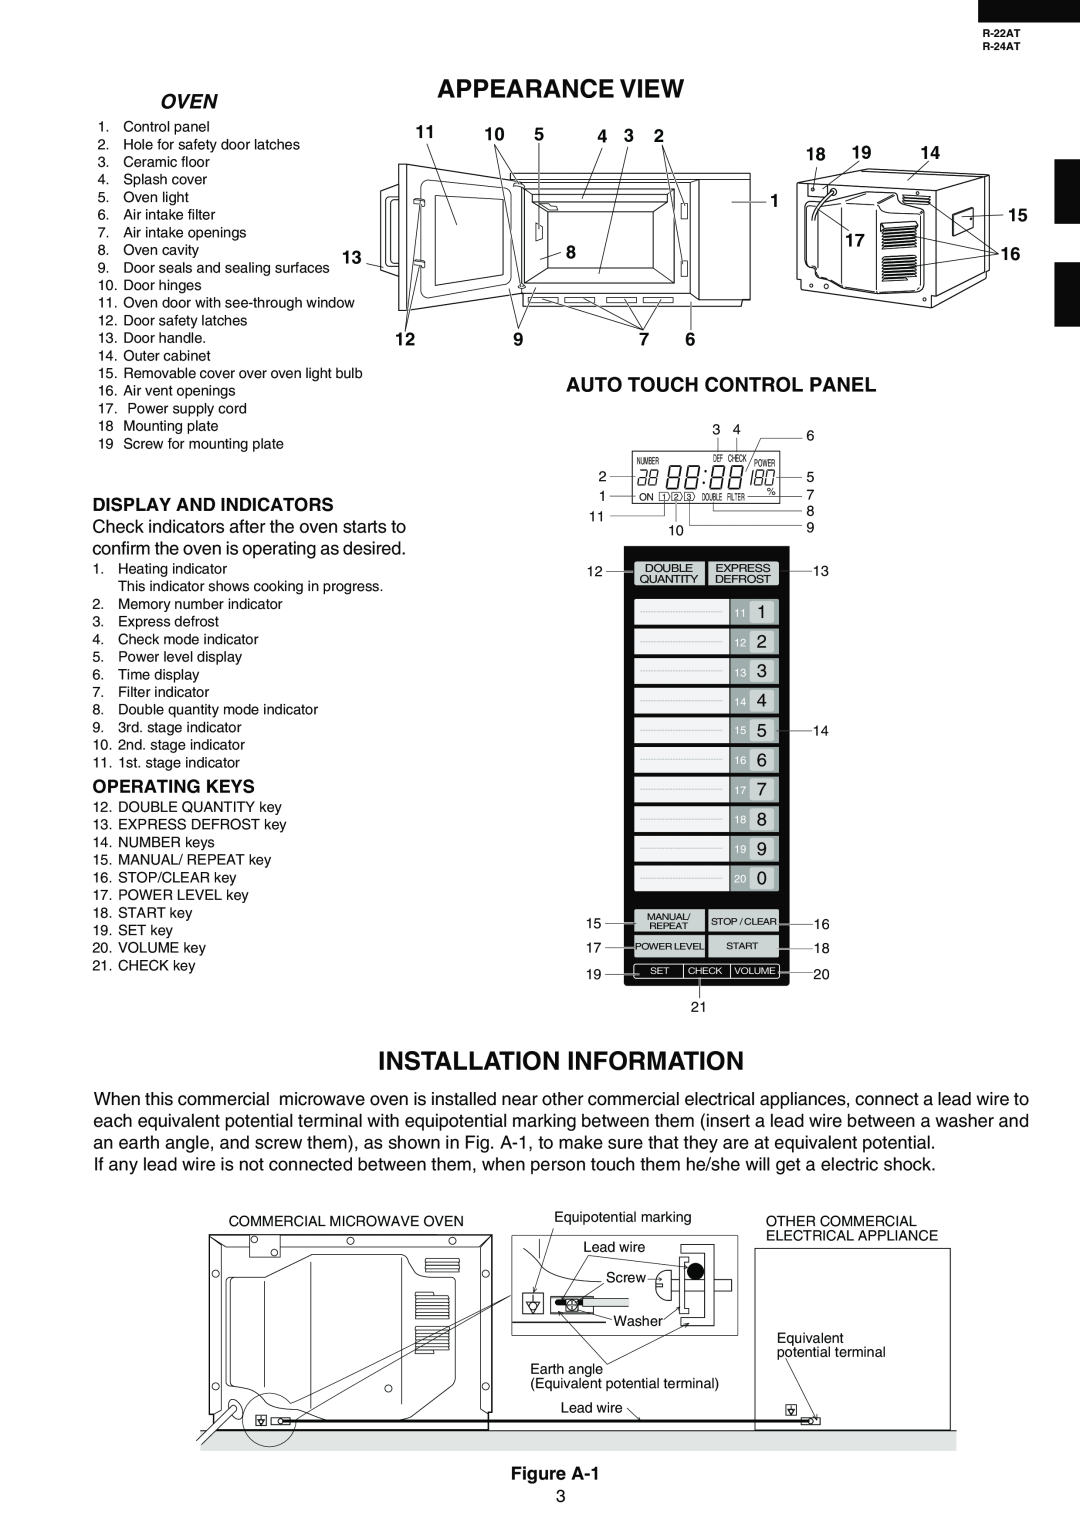 Sharp R-22AT Appearance View, Installation Information, Auto Touch Control Panel, Display And Indicators, Operating Keys 